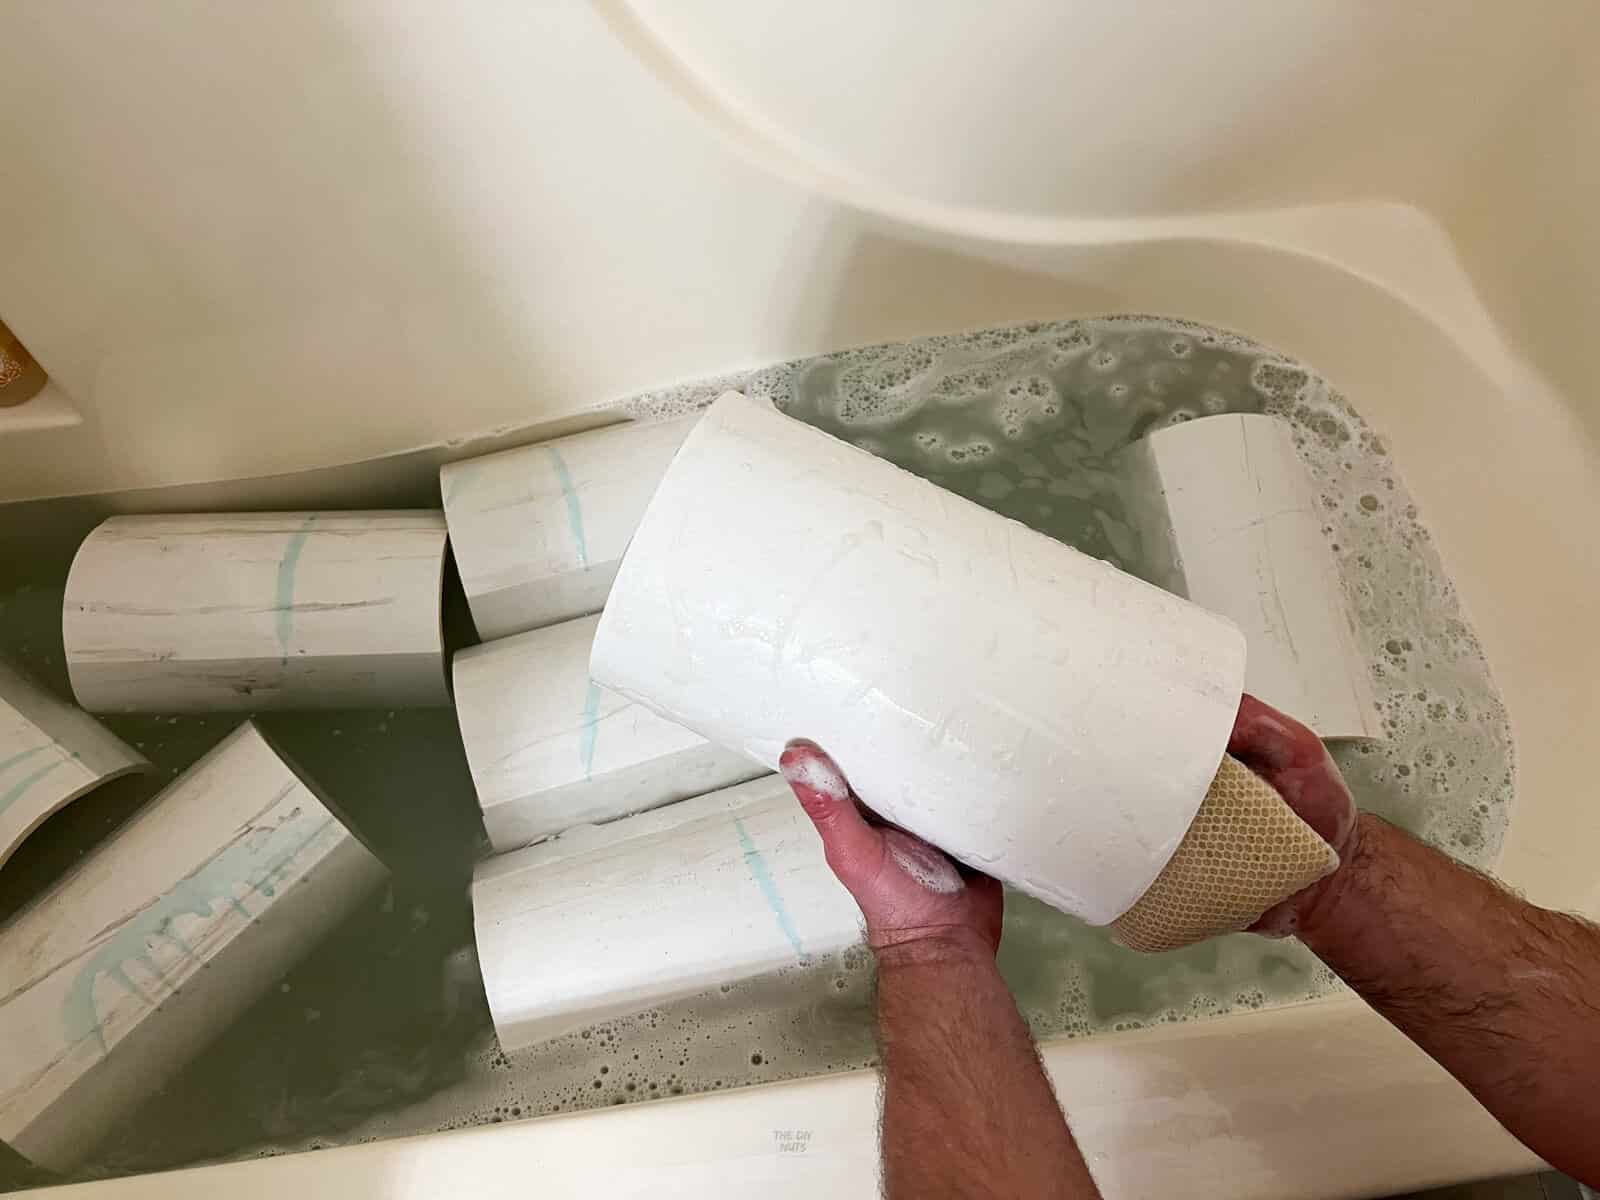 PVC pieces being cleaned in a bathroom tub.